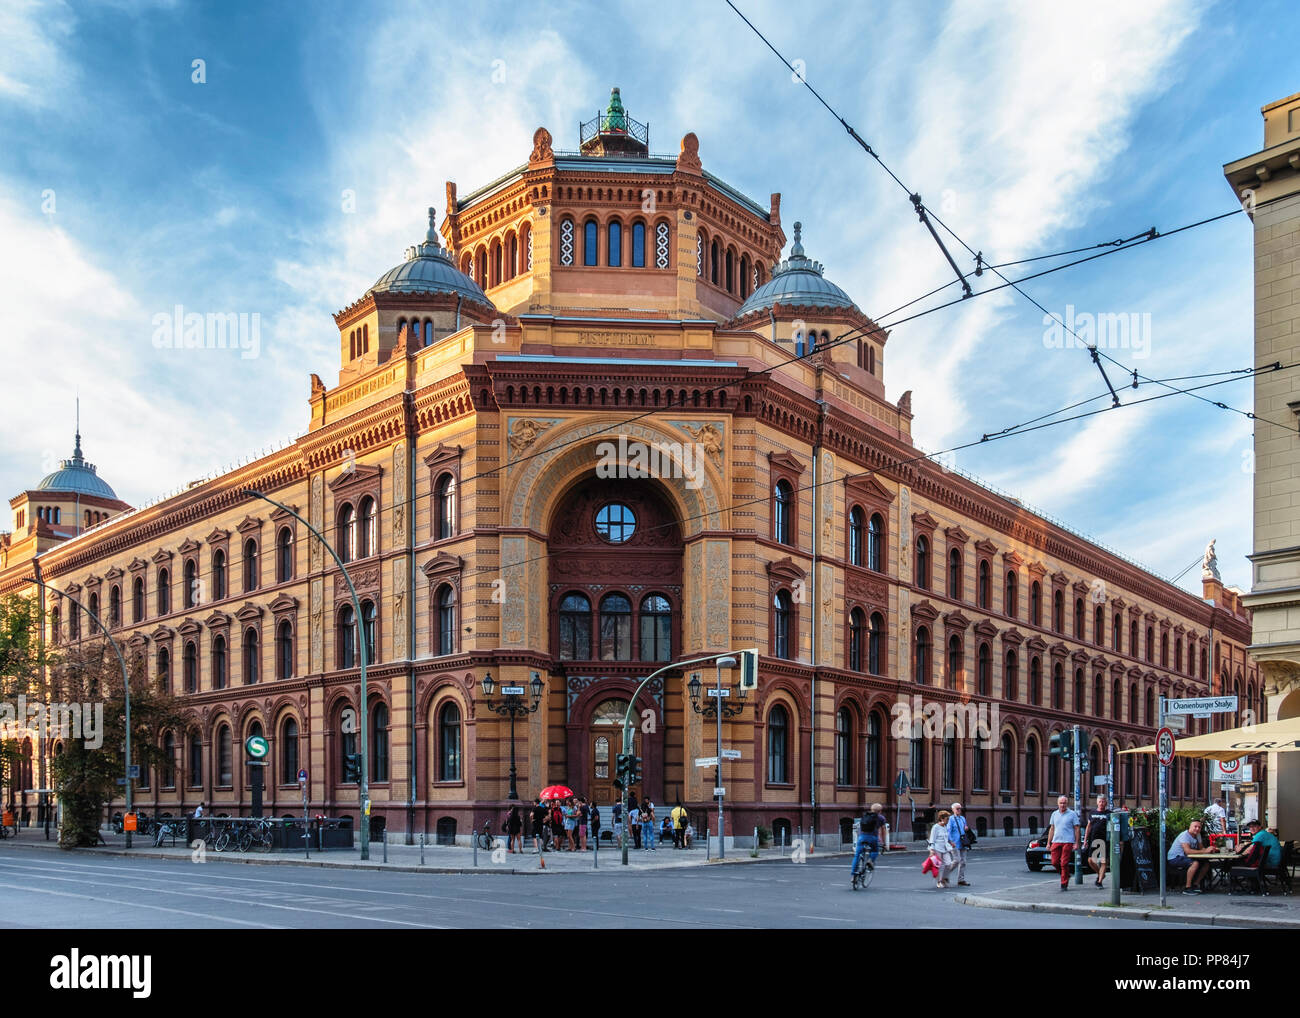 Berlin-Mitte. Historic listed old Post Office building with brick exterior, octagonal tower,two green domes and decorative arched entrance Stock Photo